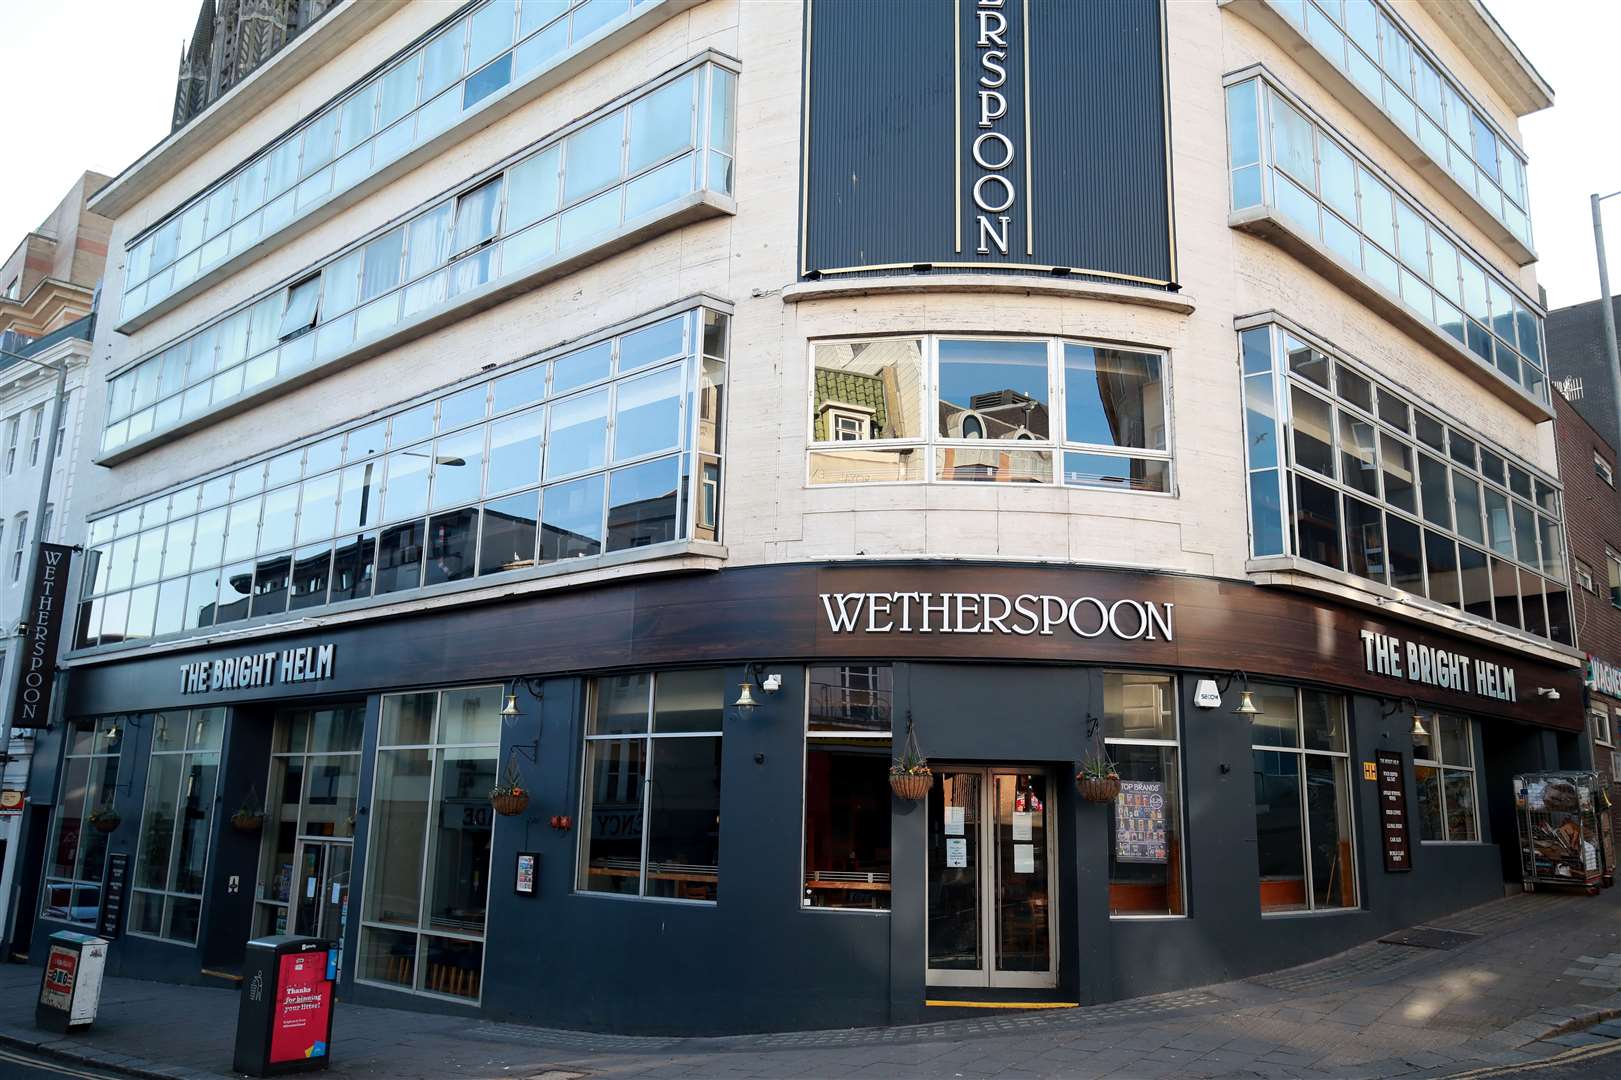 Wetherspoon’s temporarily shut all its pubs last month including The Bright Helm pub in Brighton (Adam Davy/PA)